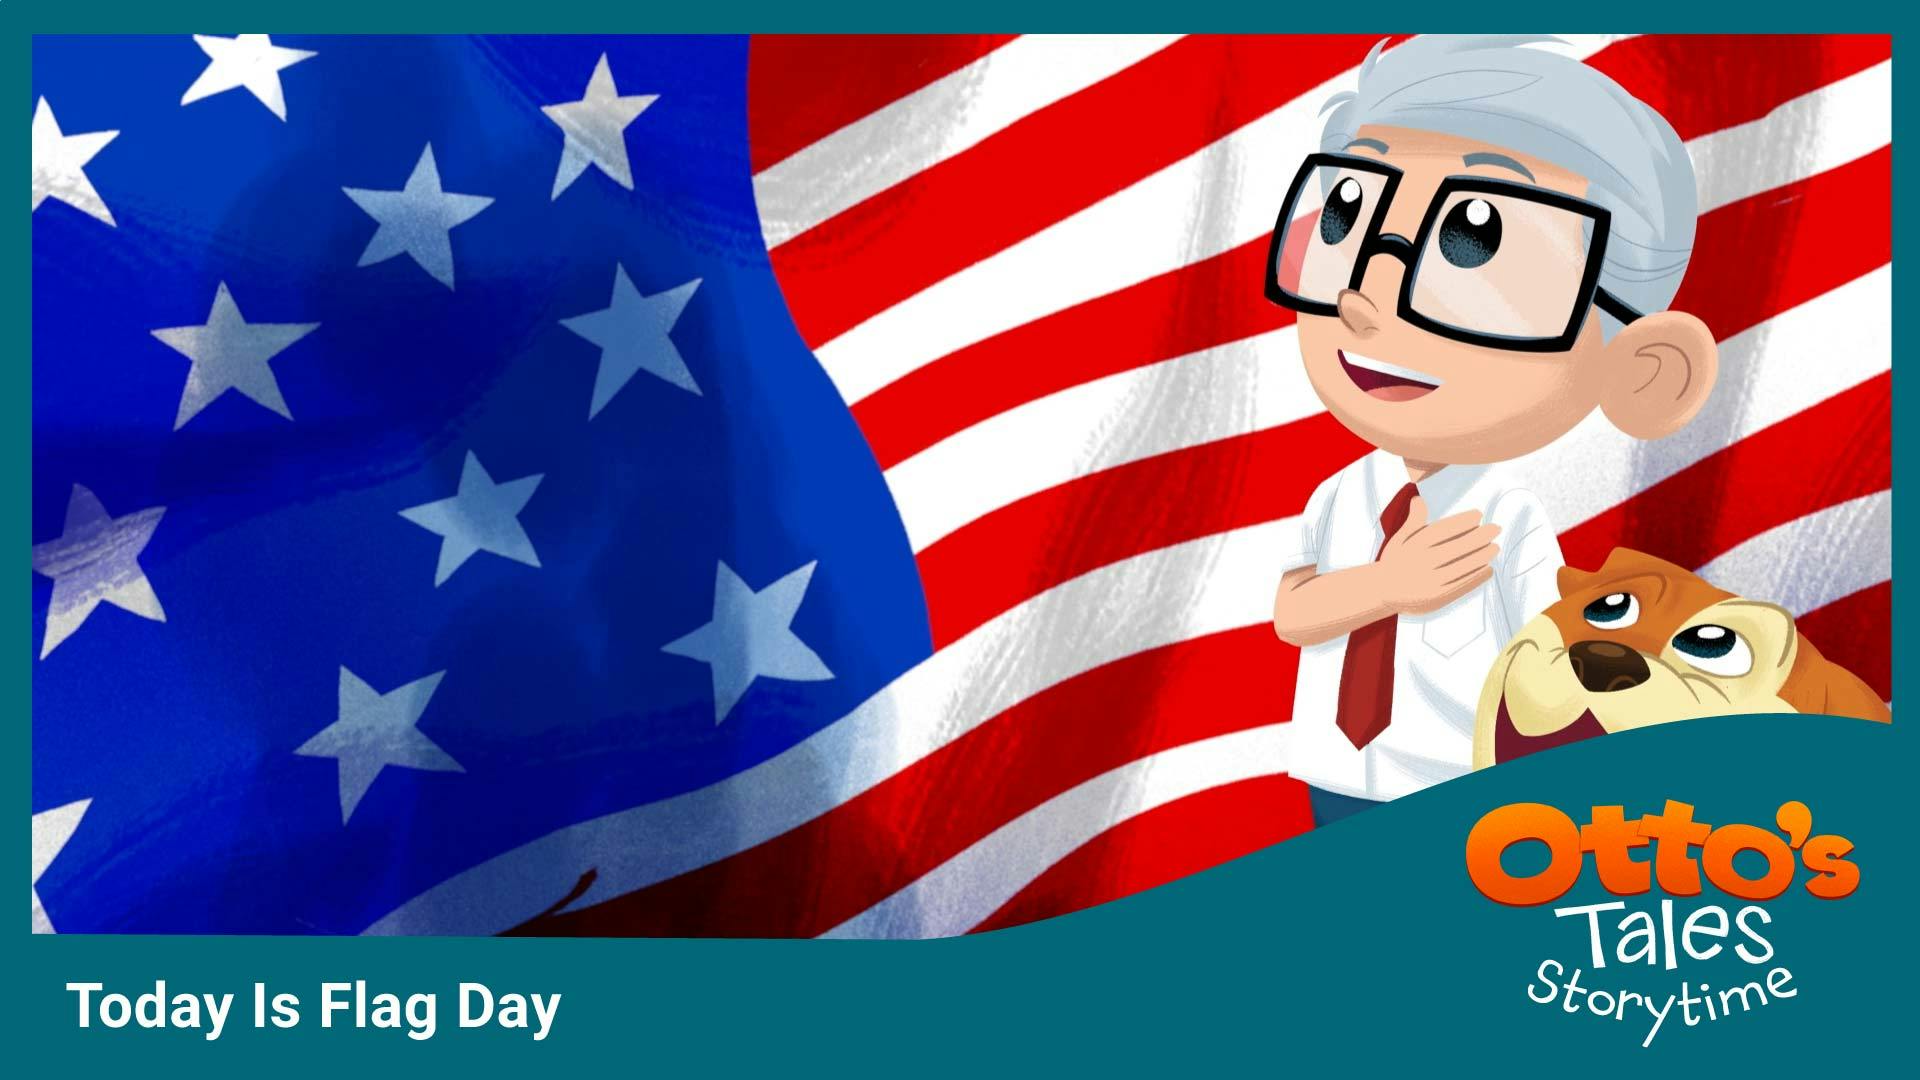 Today Is Flag Day!